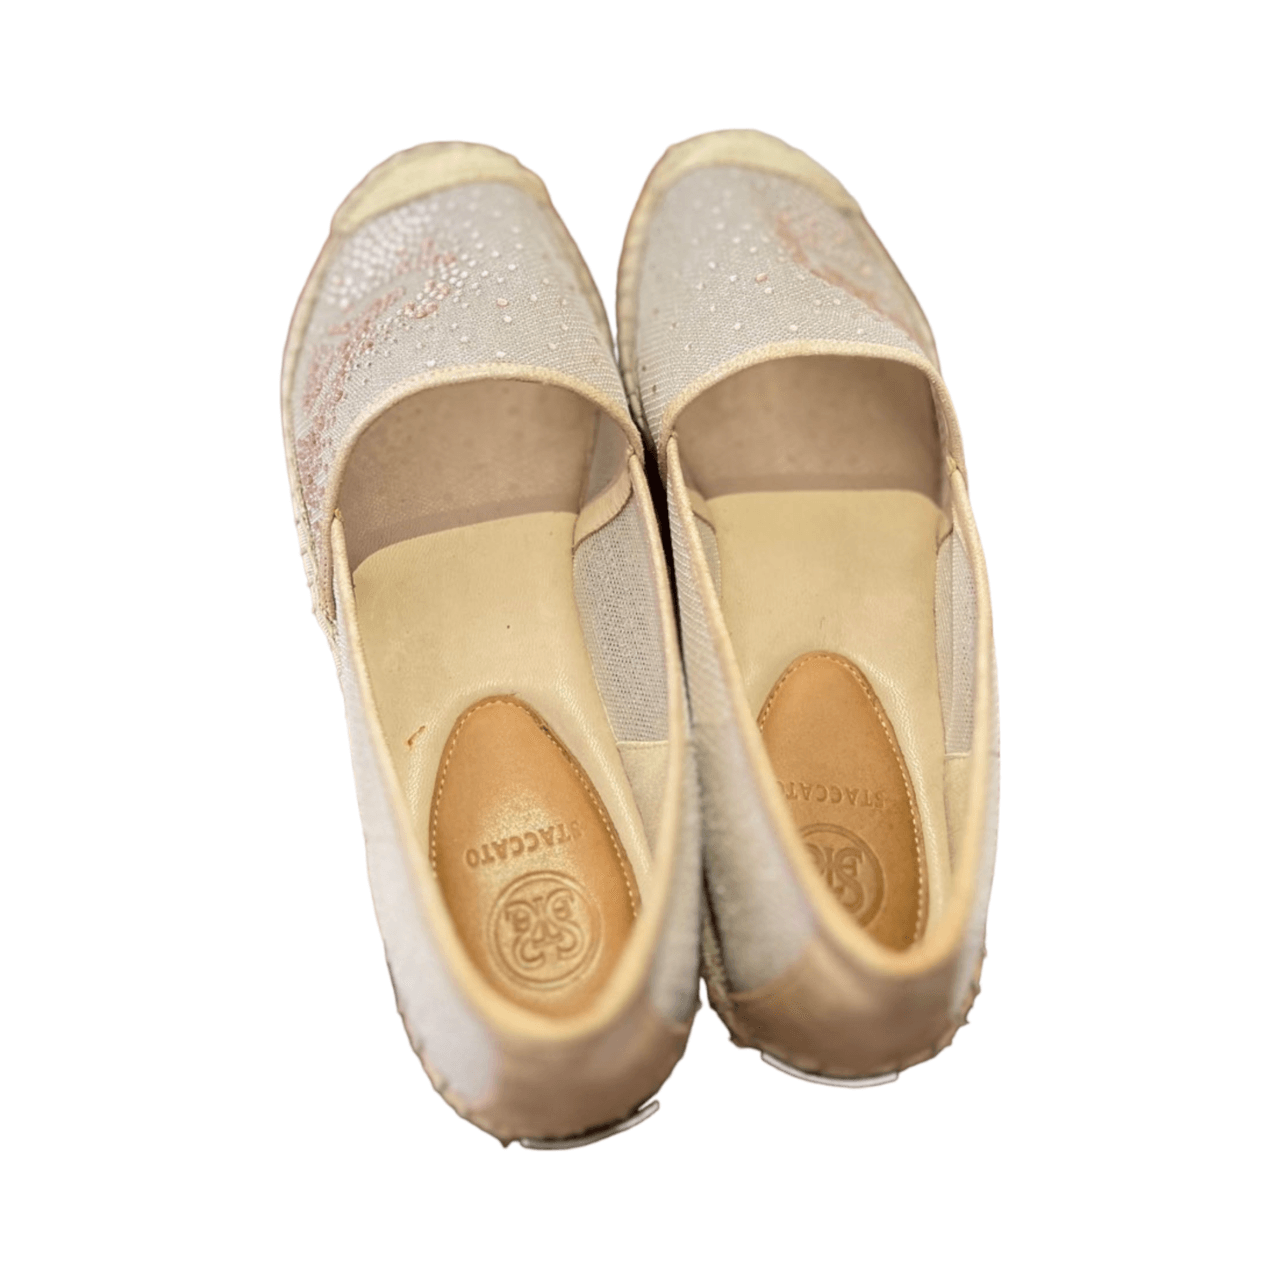 Staccato Gold & Beige Flats